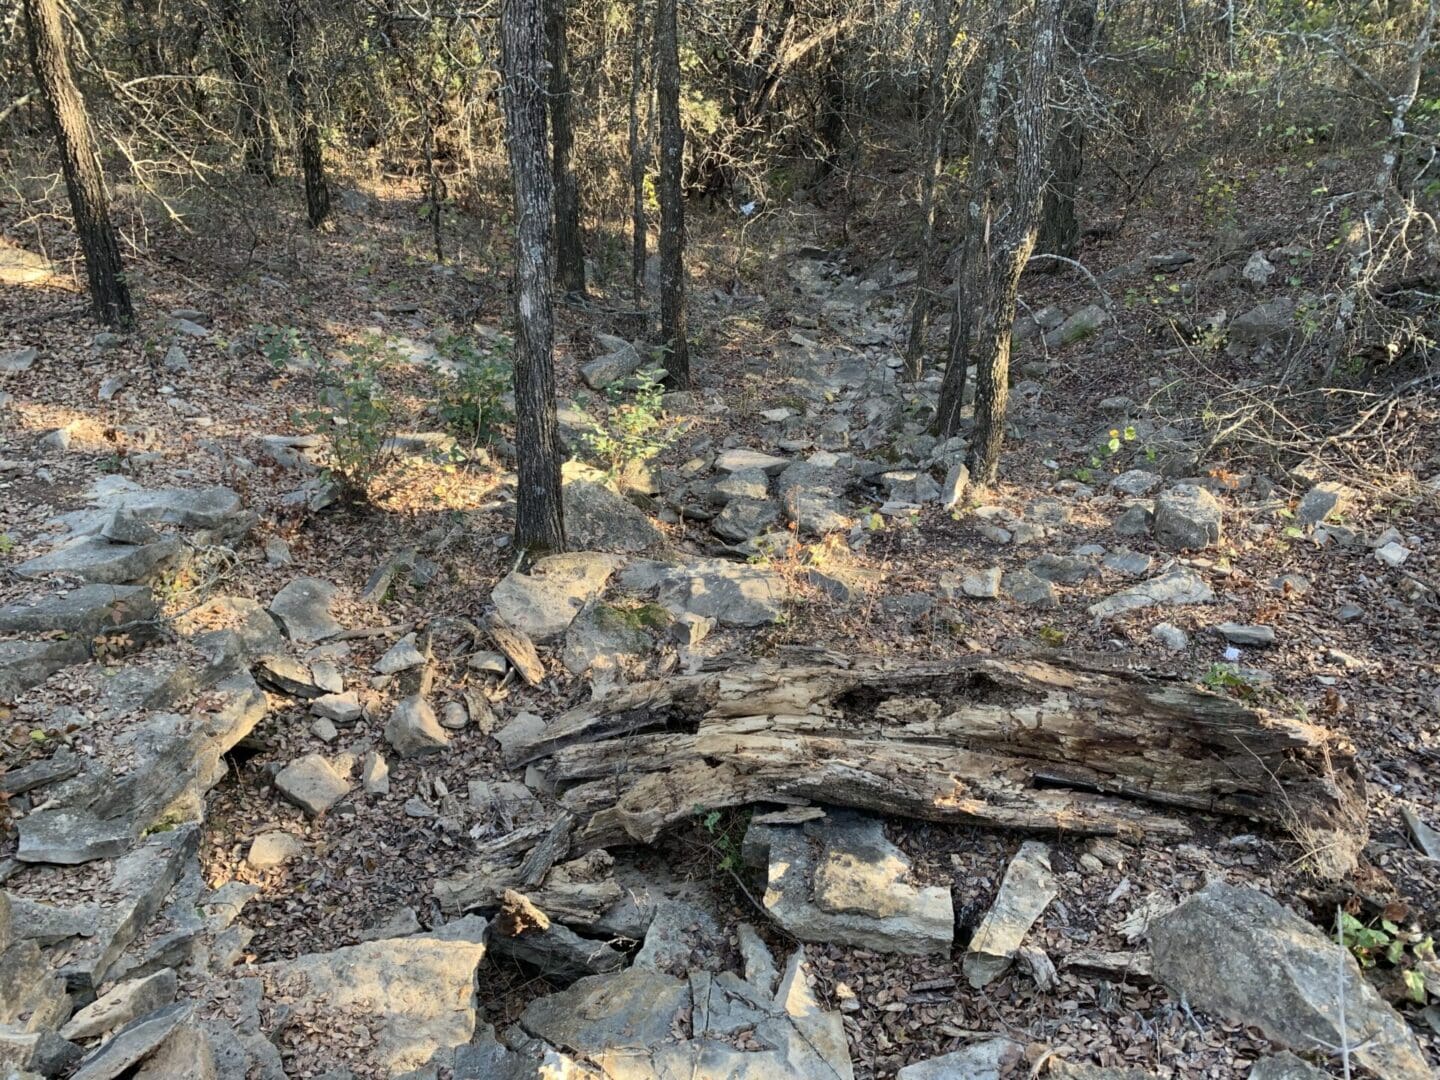 A forest with rocks and trees in the background.